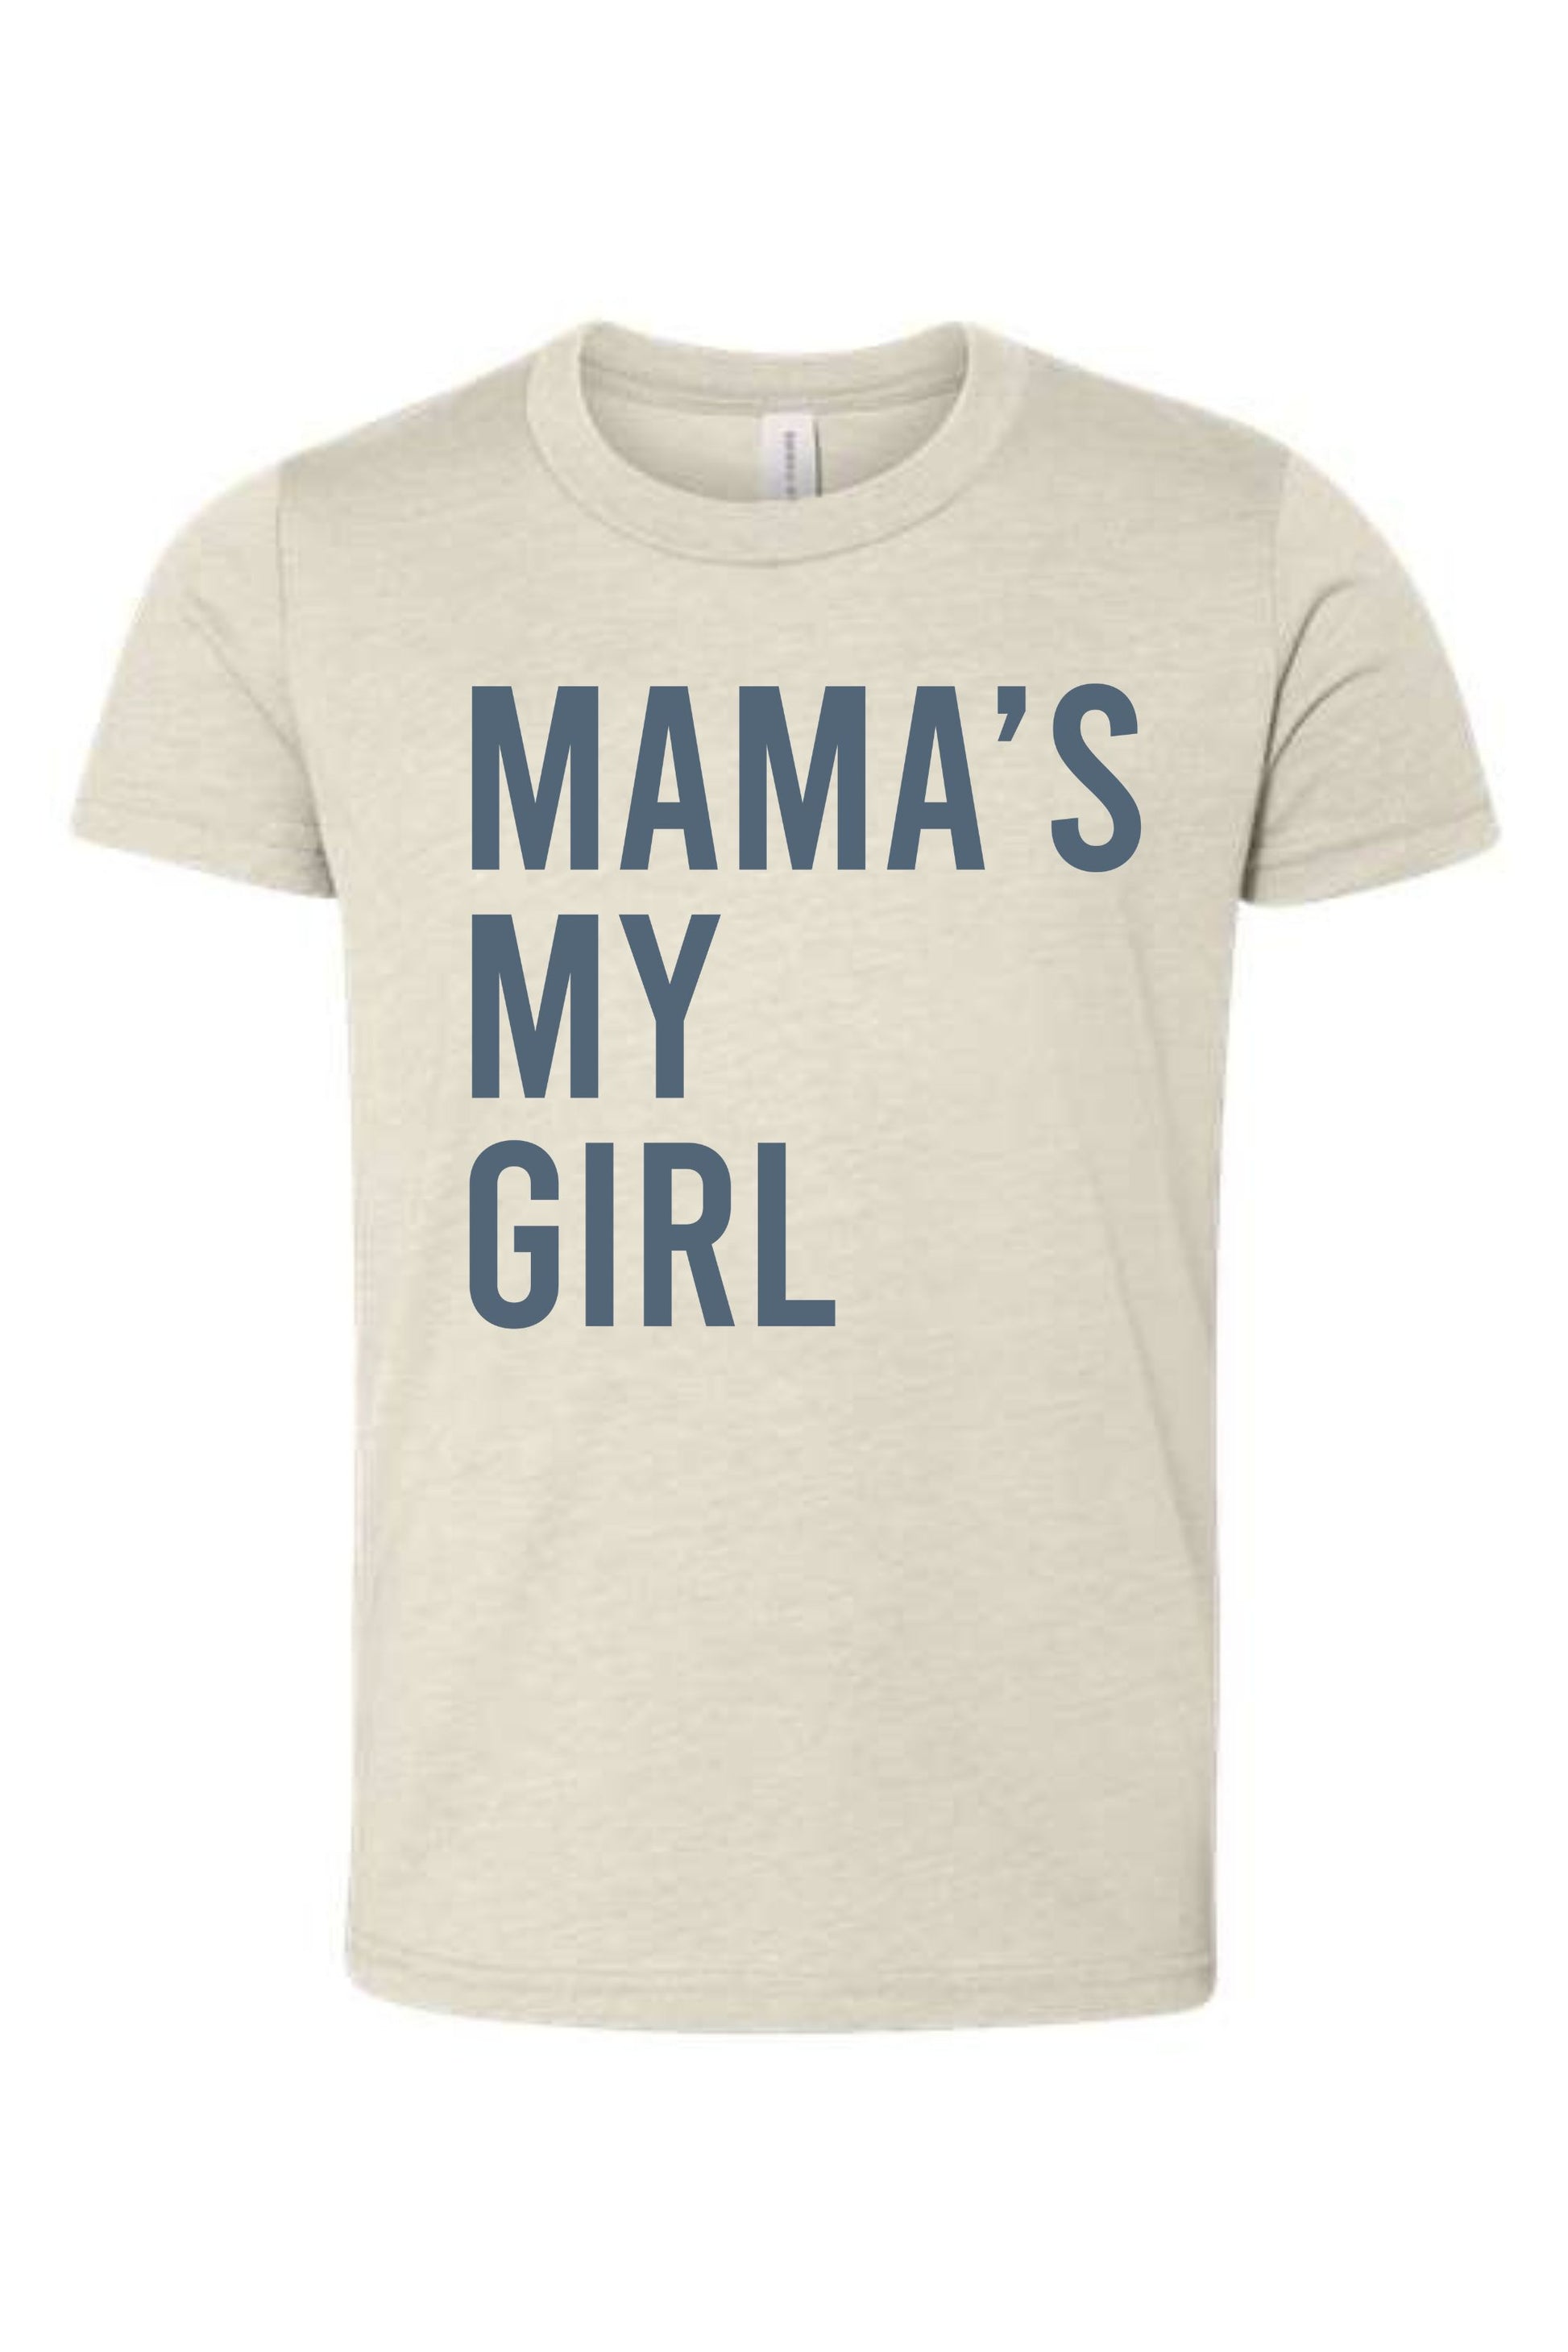 Mama's My Girl | Tee | Kids-Sister Shirts-Sister Shirts, Cute & Custom Tees for Mama & Littles in Trussville, Alabama.